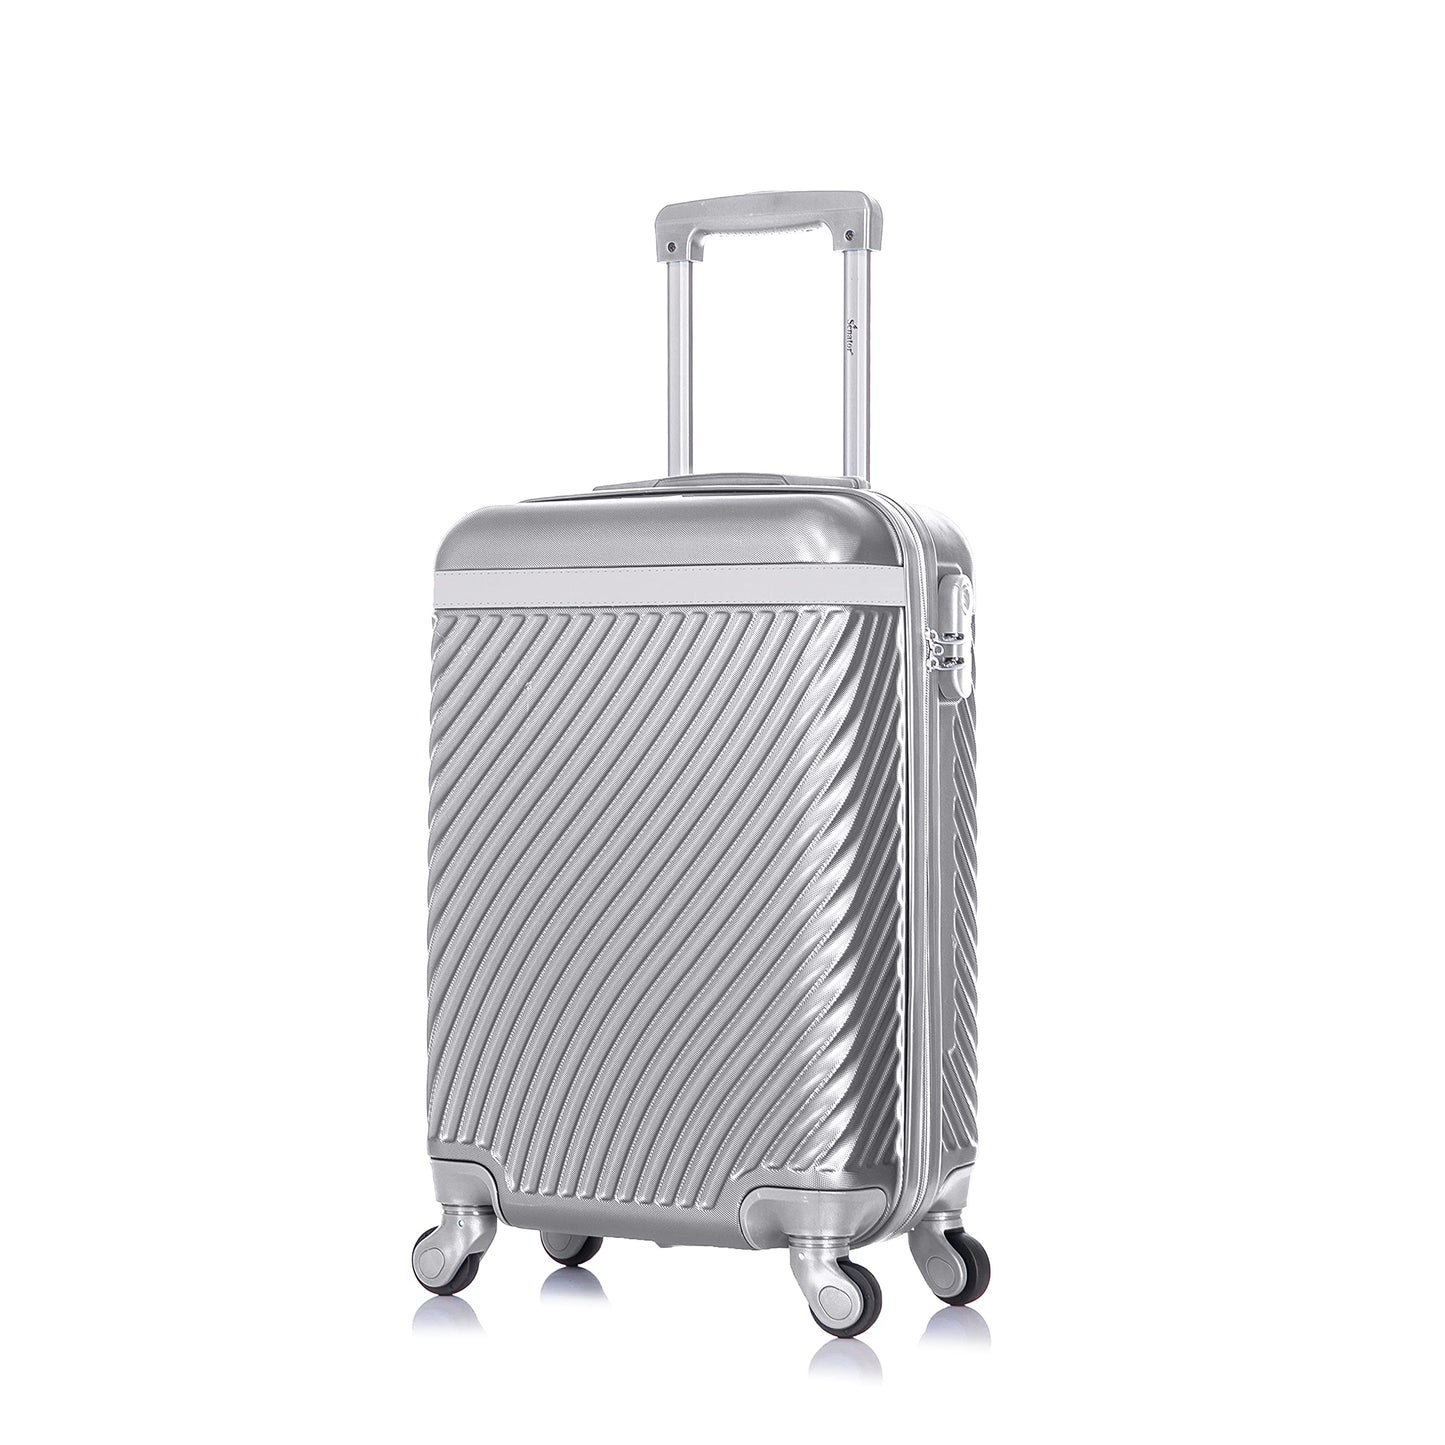 Senator Lightweight Hard Case luggage ABS carry on suitcase with 4 Quite Spinner wheels KH1065 (Carry-On 20-Inch, Silver White)